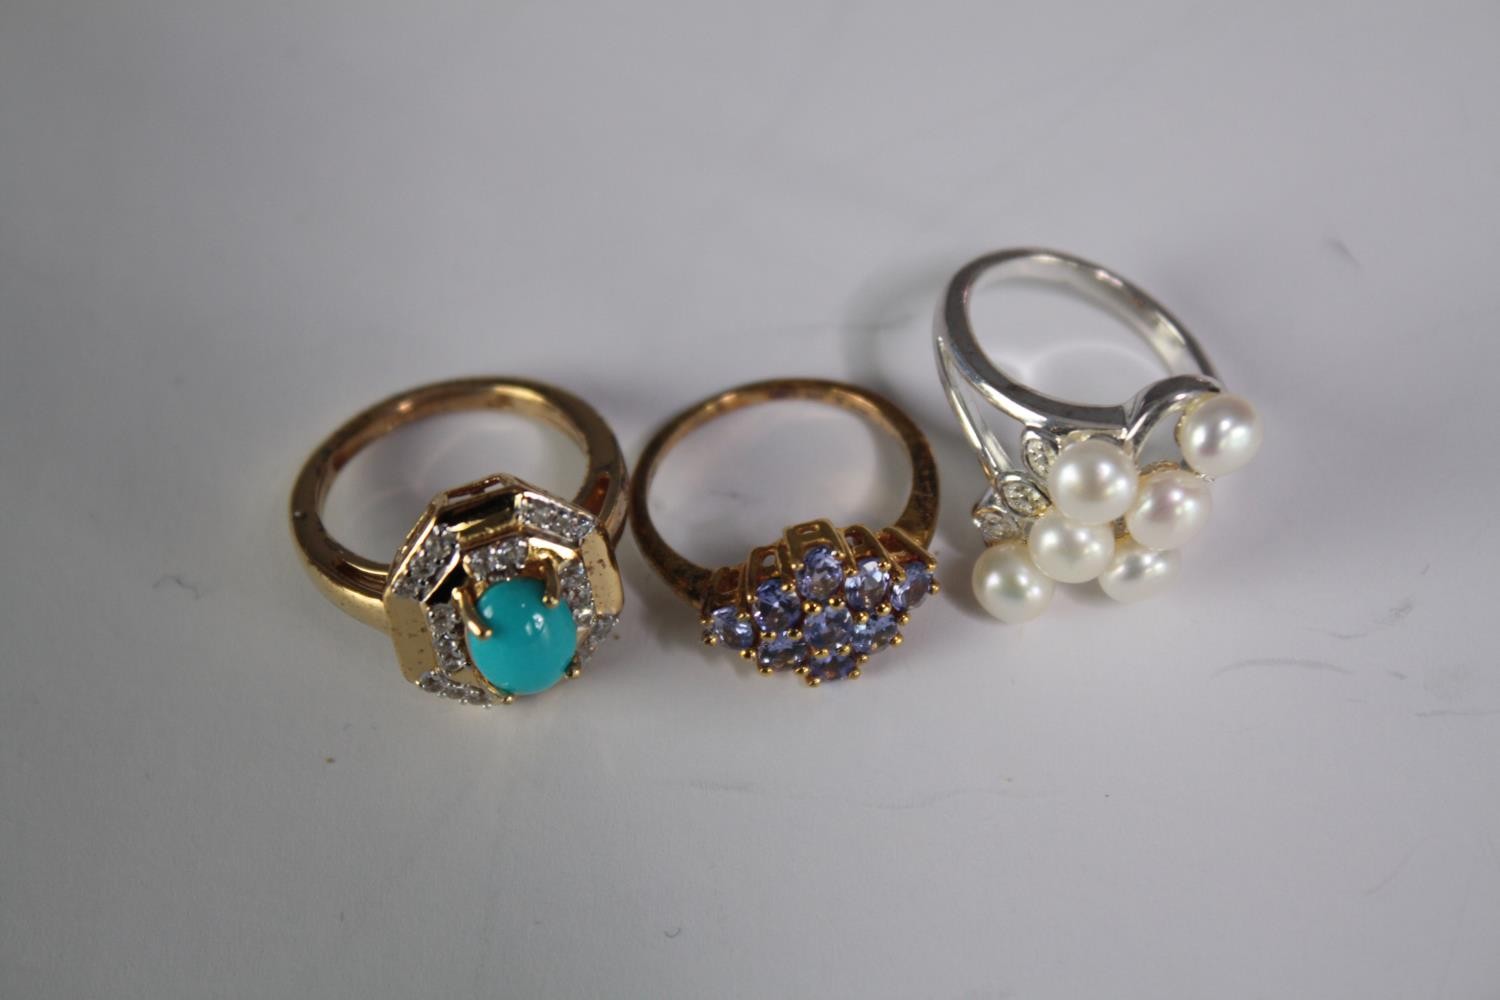 A collection of ten silver gem-set rings of various designs. Set with rose quartz, Turquoise, - Image 2 of 4